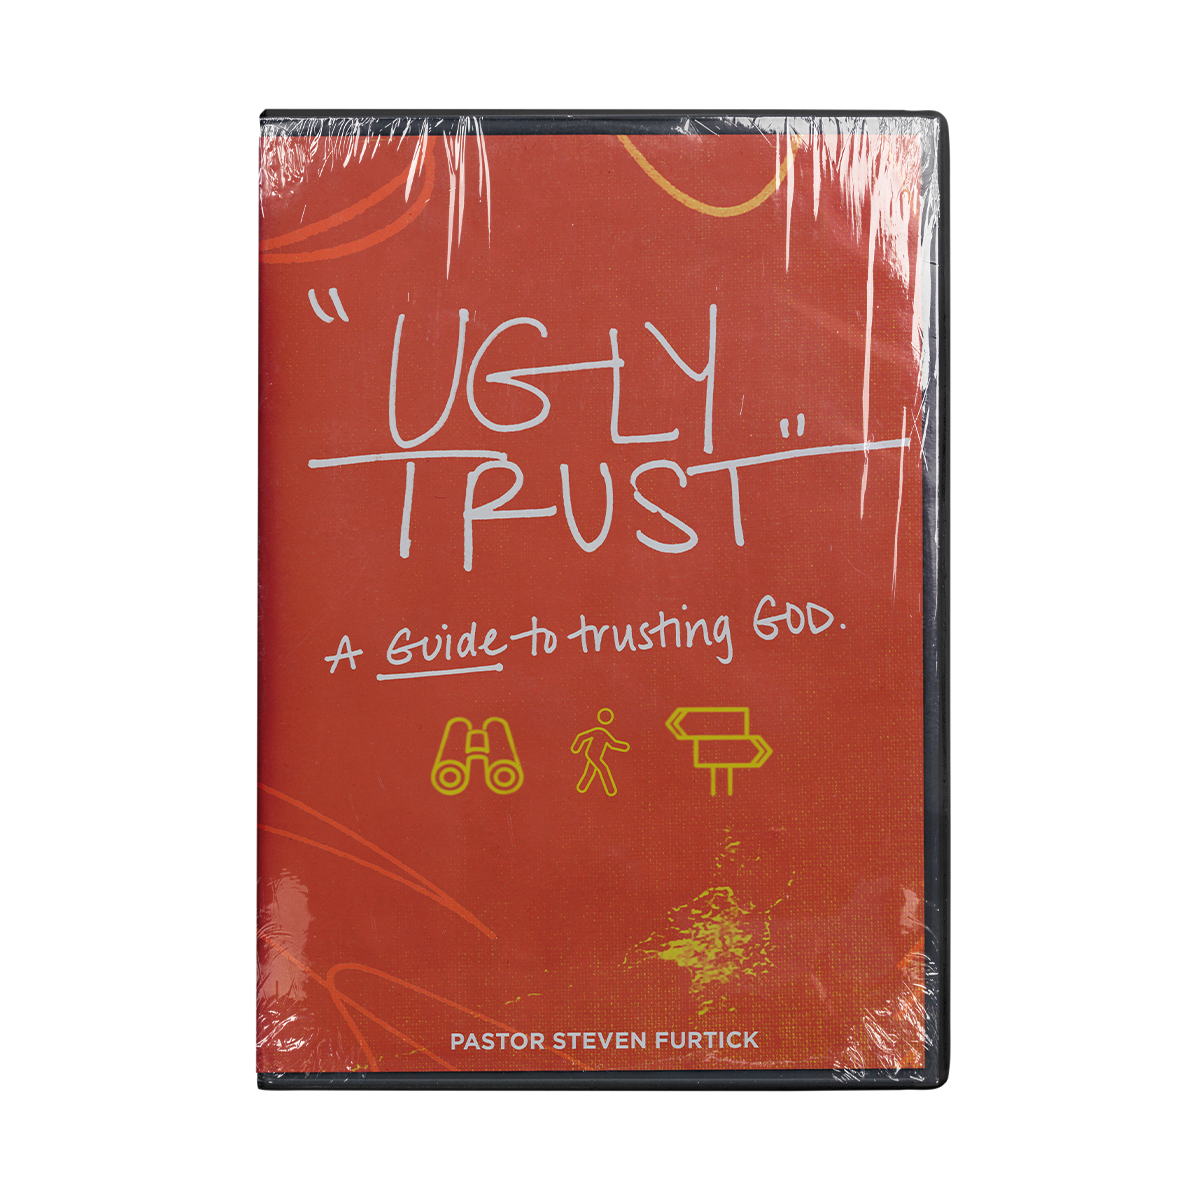 Ugly Trust: A Guide To Trusting God